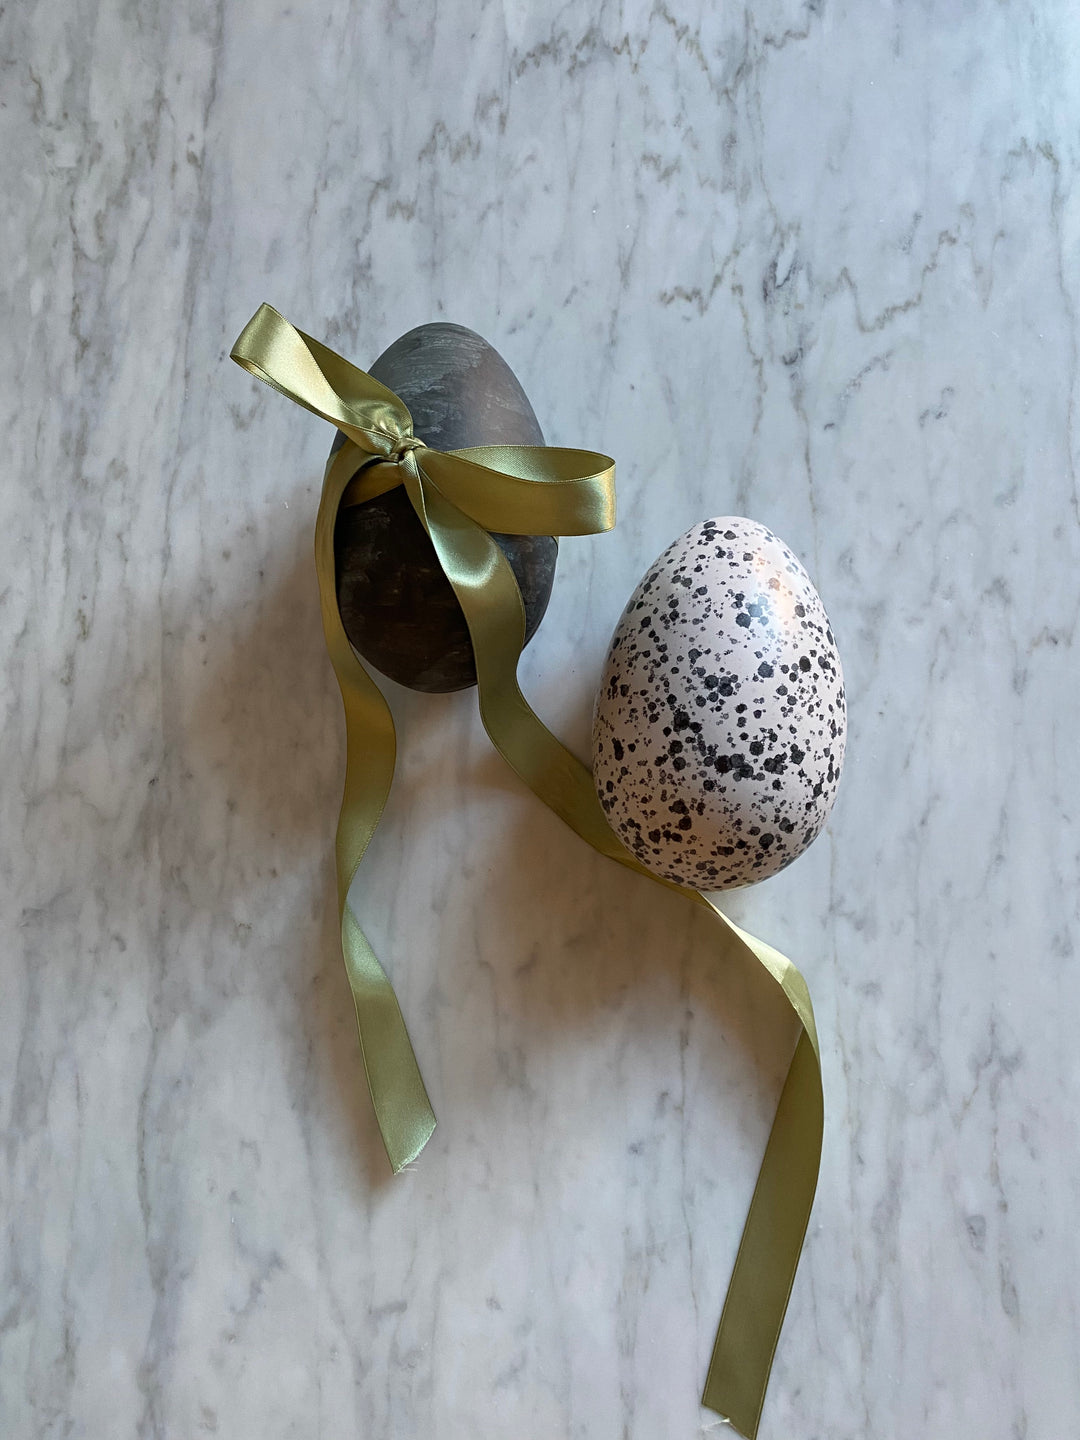 Who would love an Easter Ägg this year?